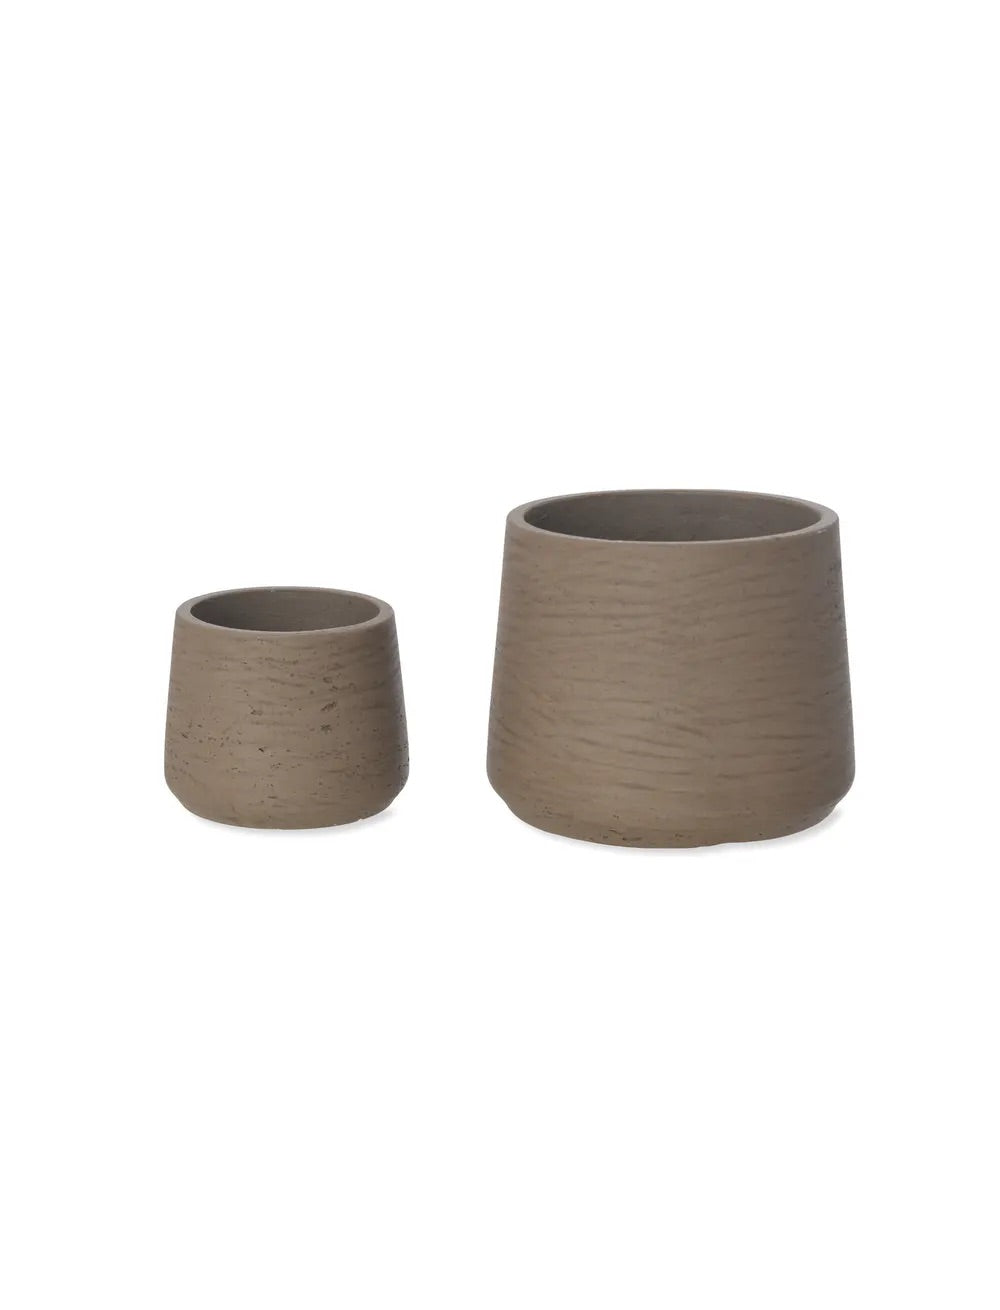 Warm Stone Tapered Cement Plant Pots - Set of 2